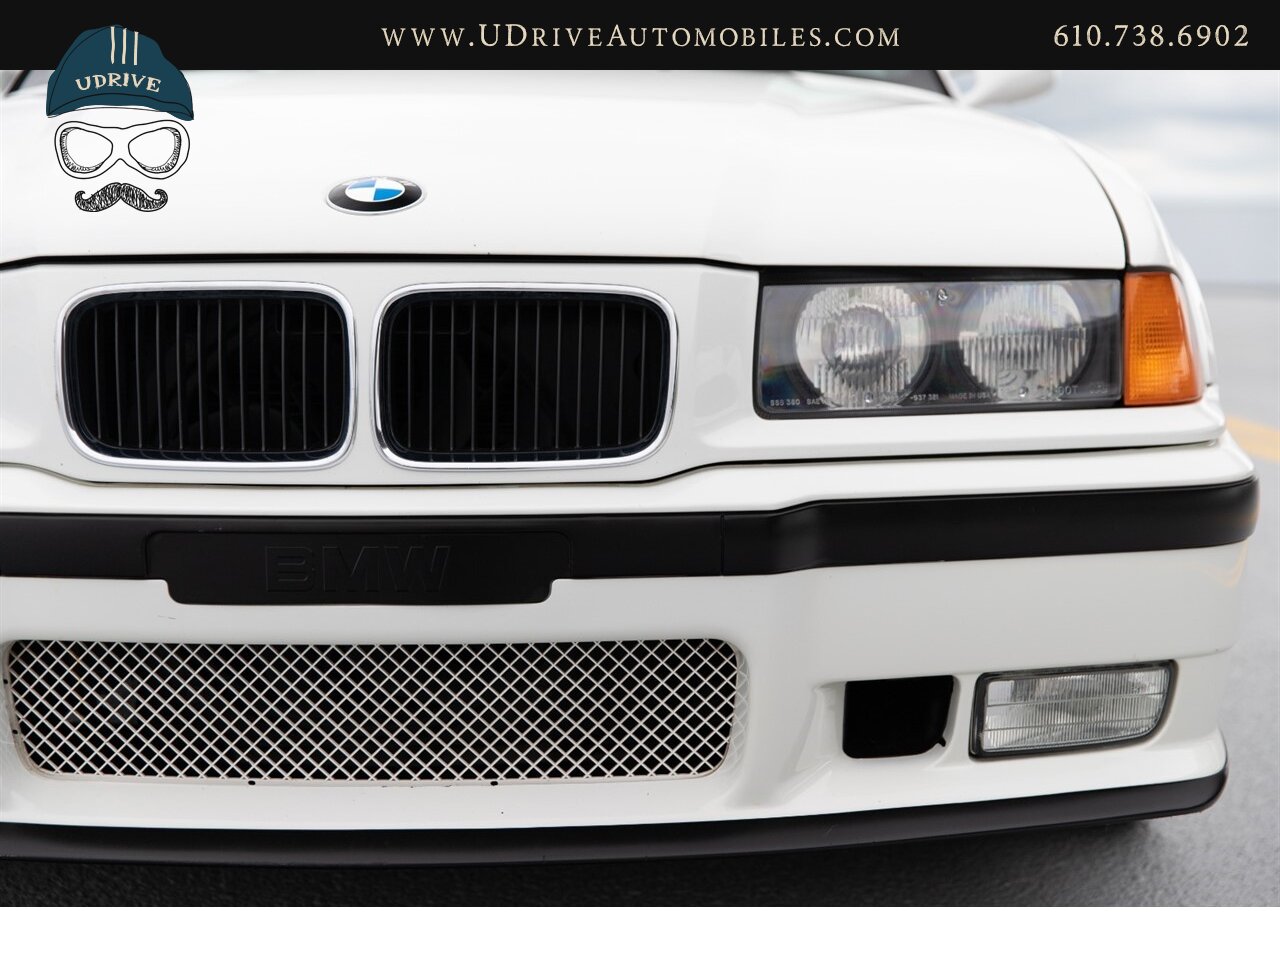 1995 BMW M3 E36 Alpine White over Black Vader Seats  5 Speed - Photo 10 - West Chester, PA 19382